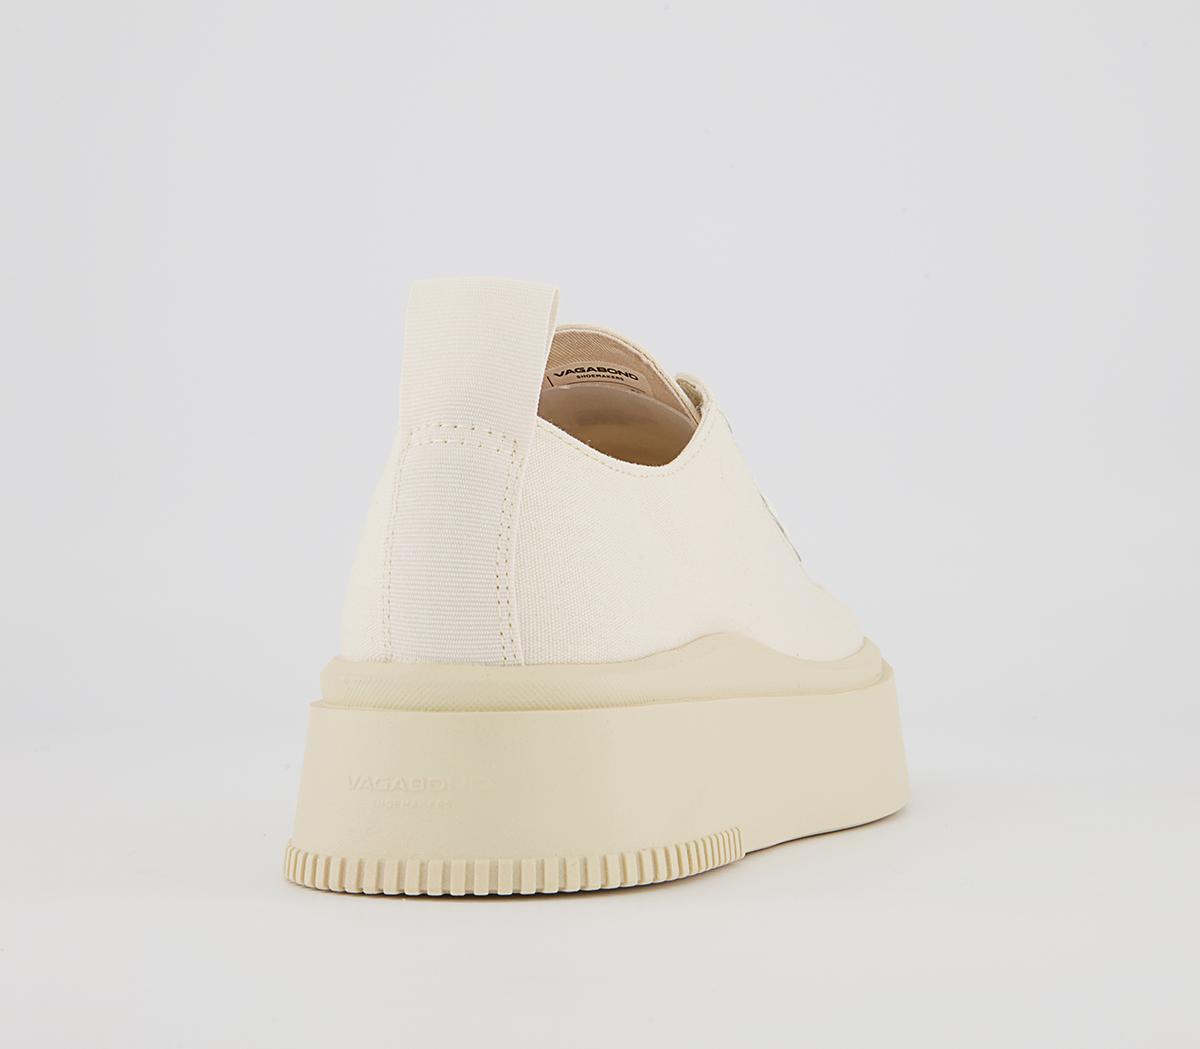 Vagabond Shoemakers Stacy Trainers Cream White - Fashion Trainers